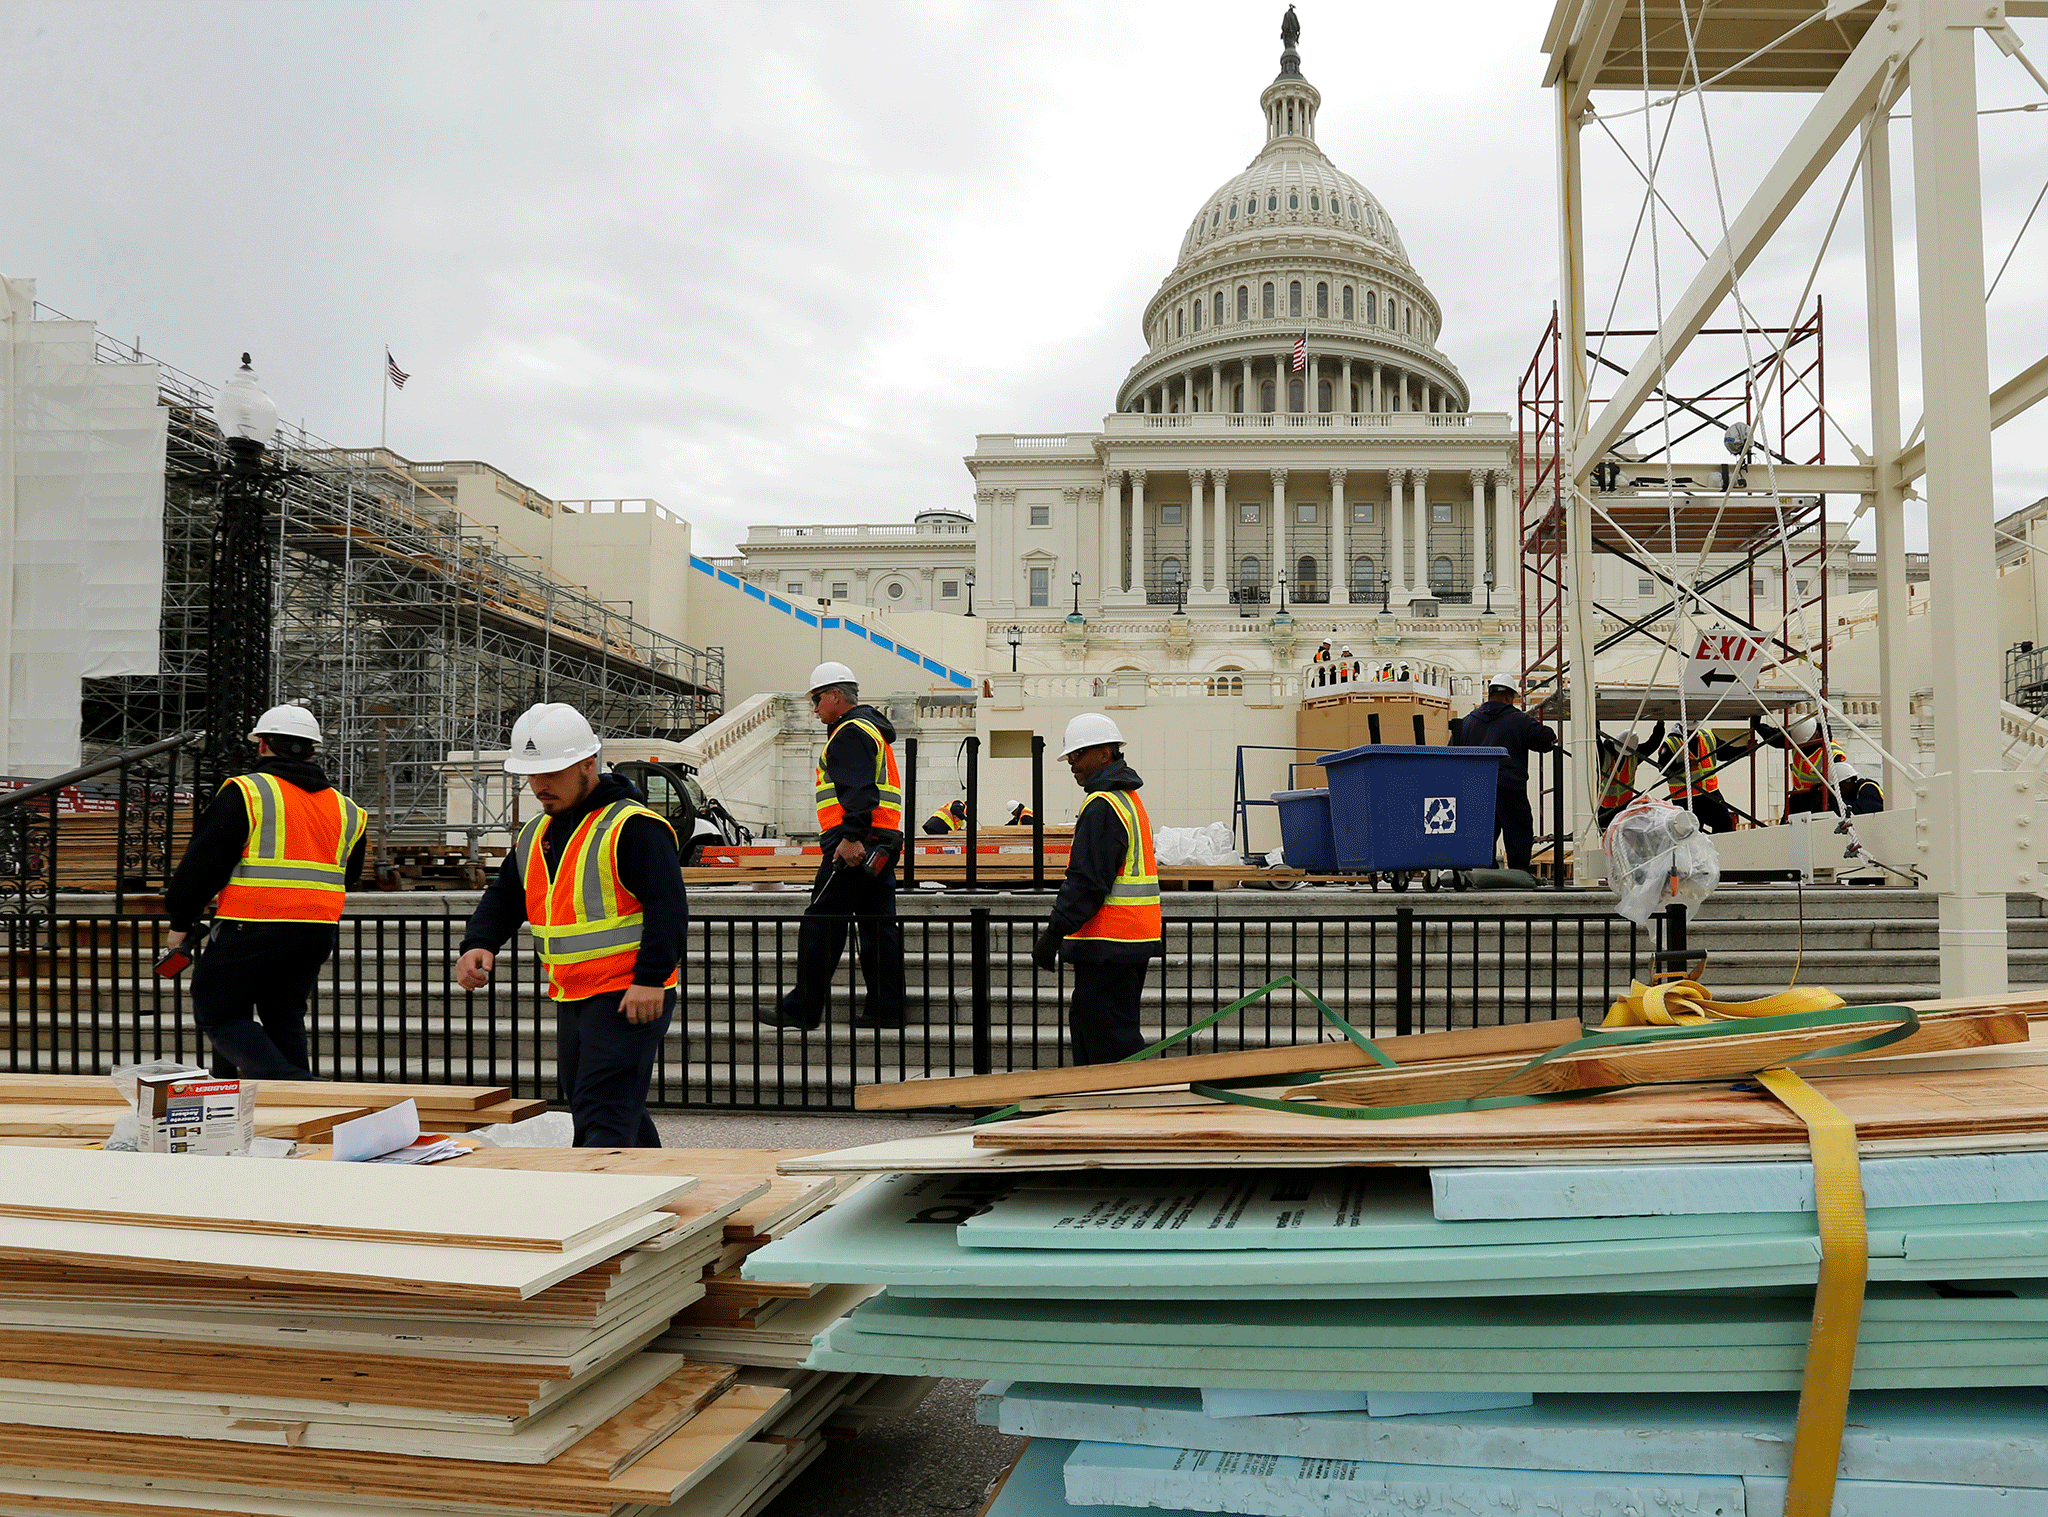 Workers construct the viewing stands ahead of Trump's inauguration at the U.S. Capitol in Washington